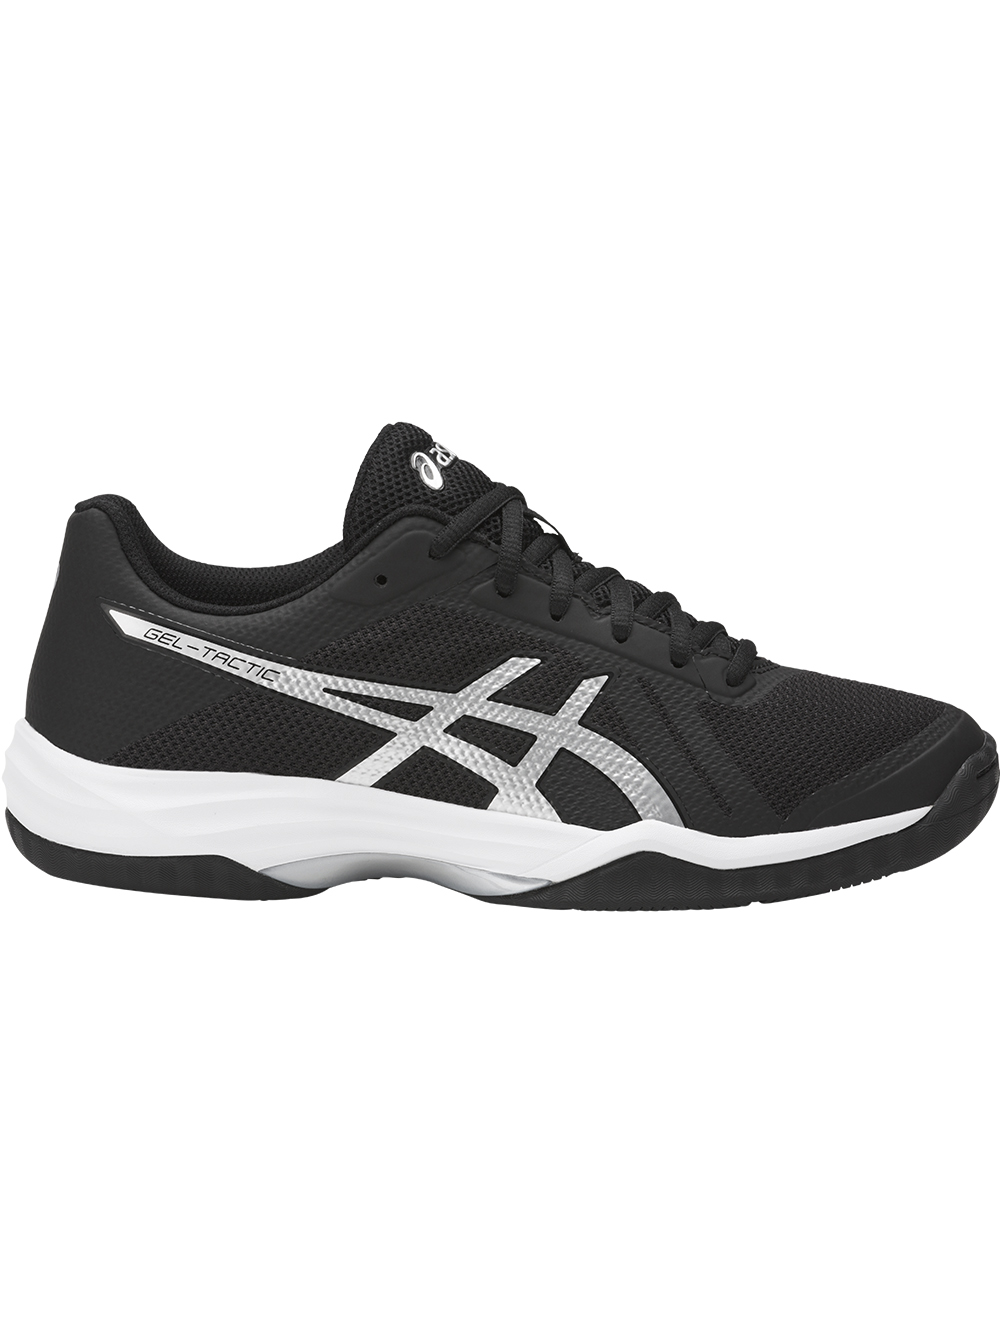 Asics Women's GEL-Tactic 2 Shoes - Black/Silver | Midwest Volleyball ...